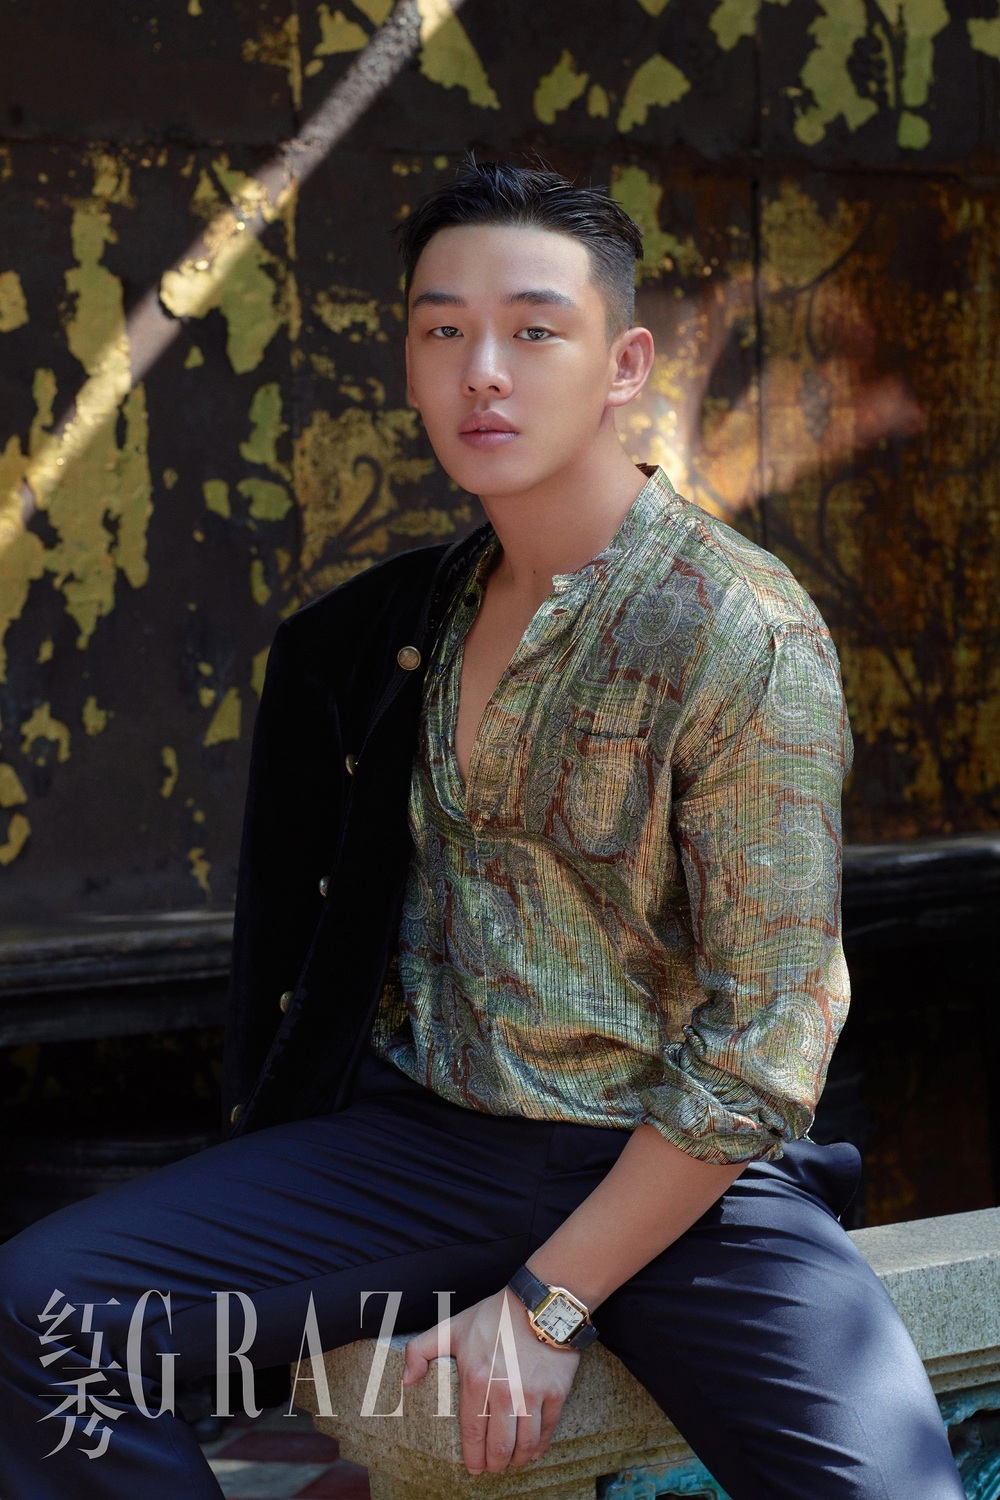 Yoo Ah-in appeared in the cover of the August issue of the Chinese edition of Grazia GRAZIA.Yoo Ah-in has enhanced the perfection of the picture with intense eyes and personality.From the edged facial expression that was introduced in a clean white jumper to the gentle eyes that were shown with a unique pattern of shirts, Yoo Ah-in, who unhappily revealed his unique character in front of the camera, showed off his unique atmosphere with his charismatic masculine beauty.Yoo Ah-in, who has achieved successful results in succession in films such as Apostle and Veteran in 2016, and has become more clearly established as a leading acting actor in Korea by stepping on the red carpet at the Cannes Film Festival through Burning Man with director Lee Chang-dong in 2018, is a member of The Artist Group Studio concrete that introduces new The Artists to the public as well as a flawless career as an actor He is active as the head of the organization.pear hyo-ju